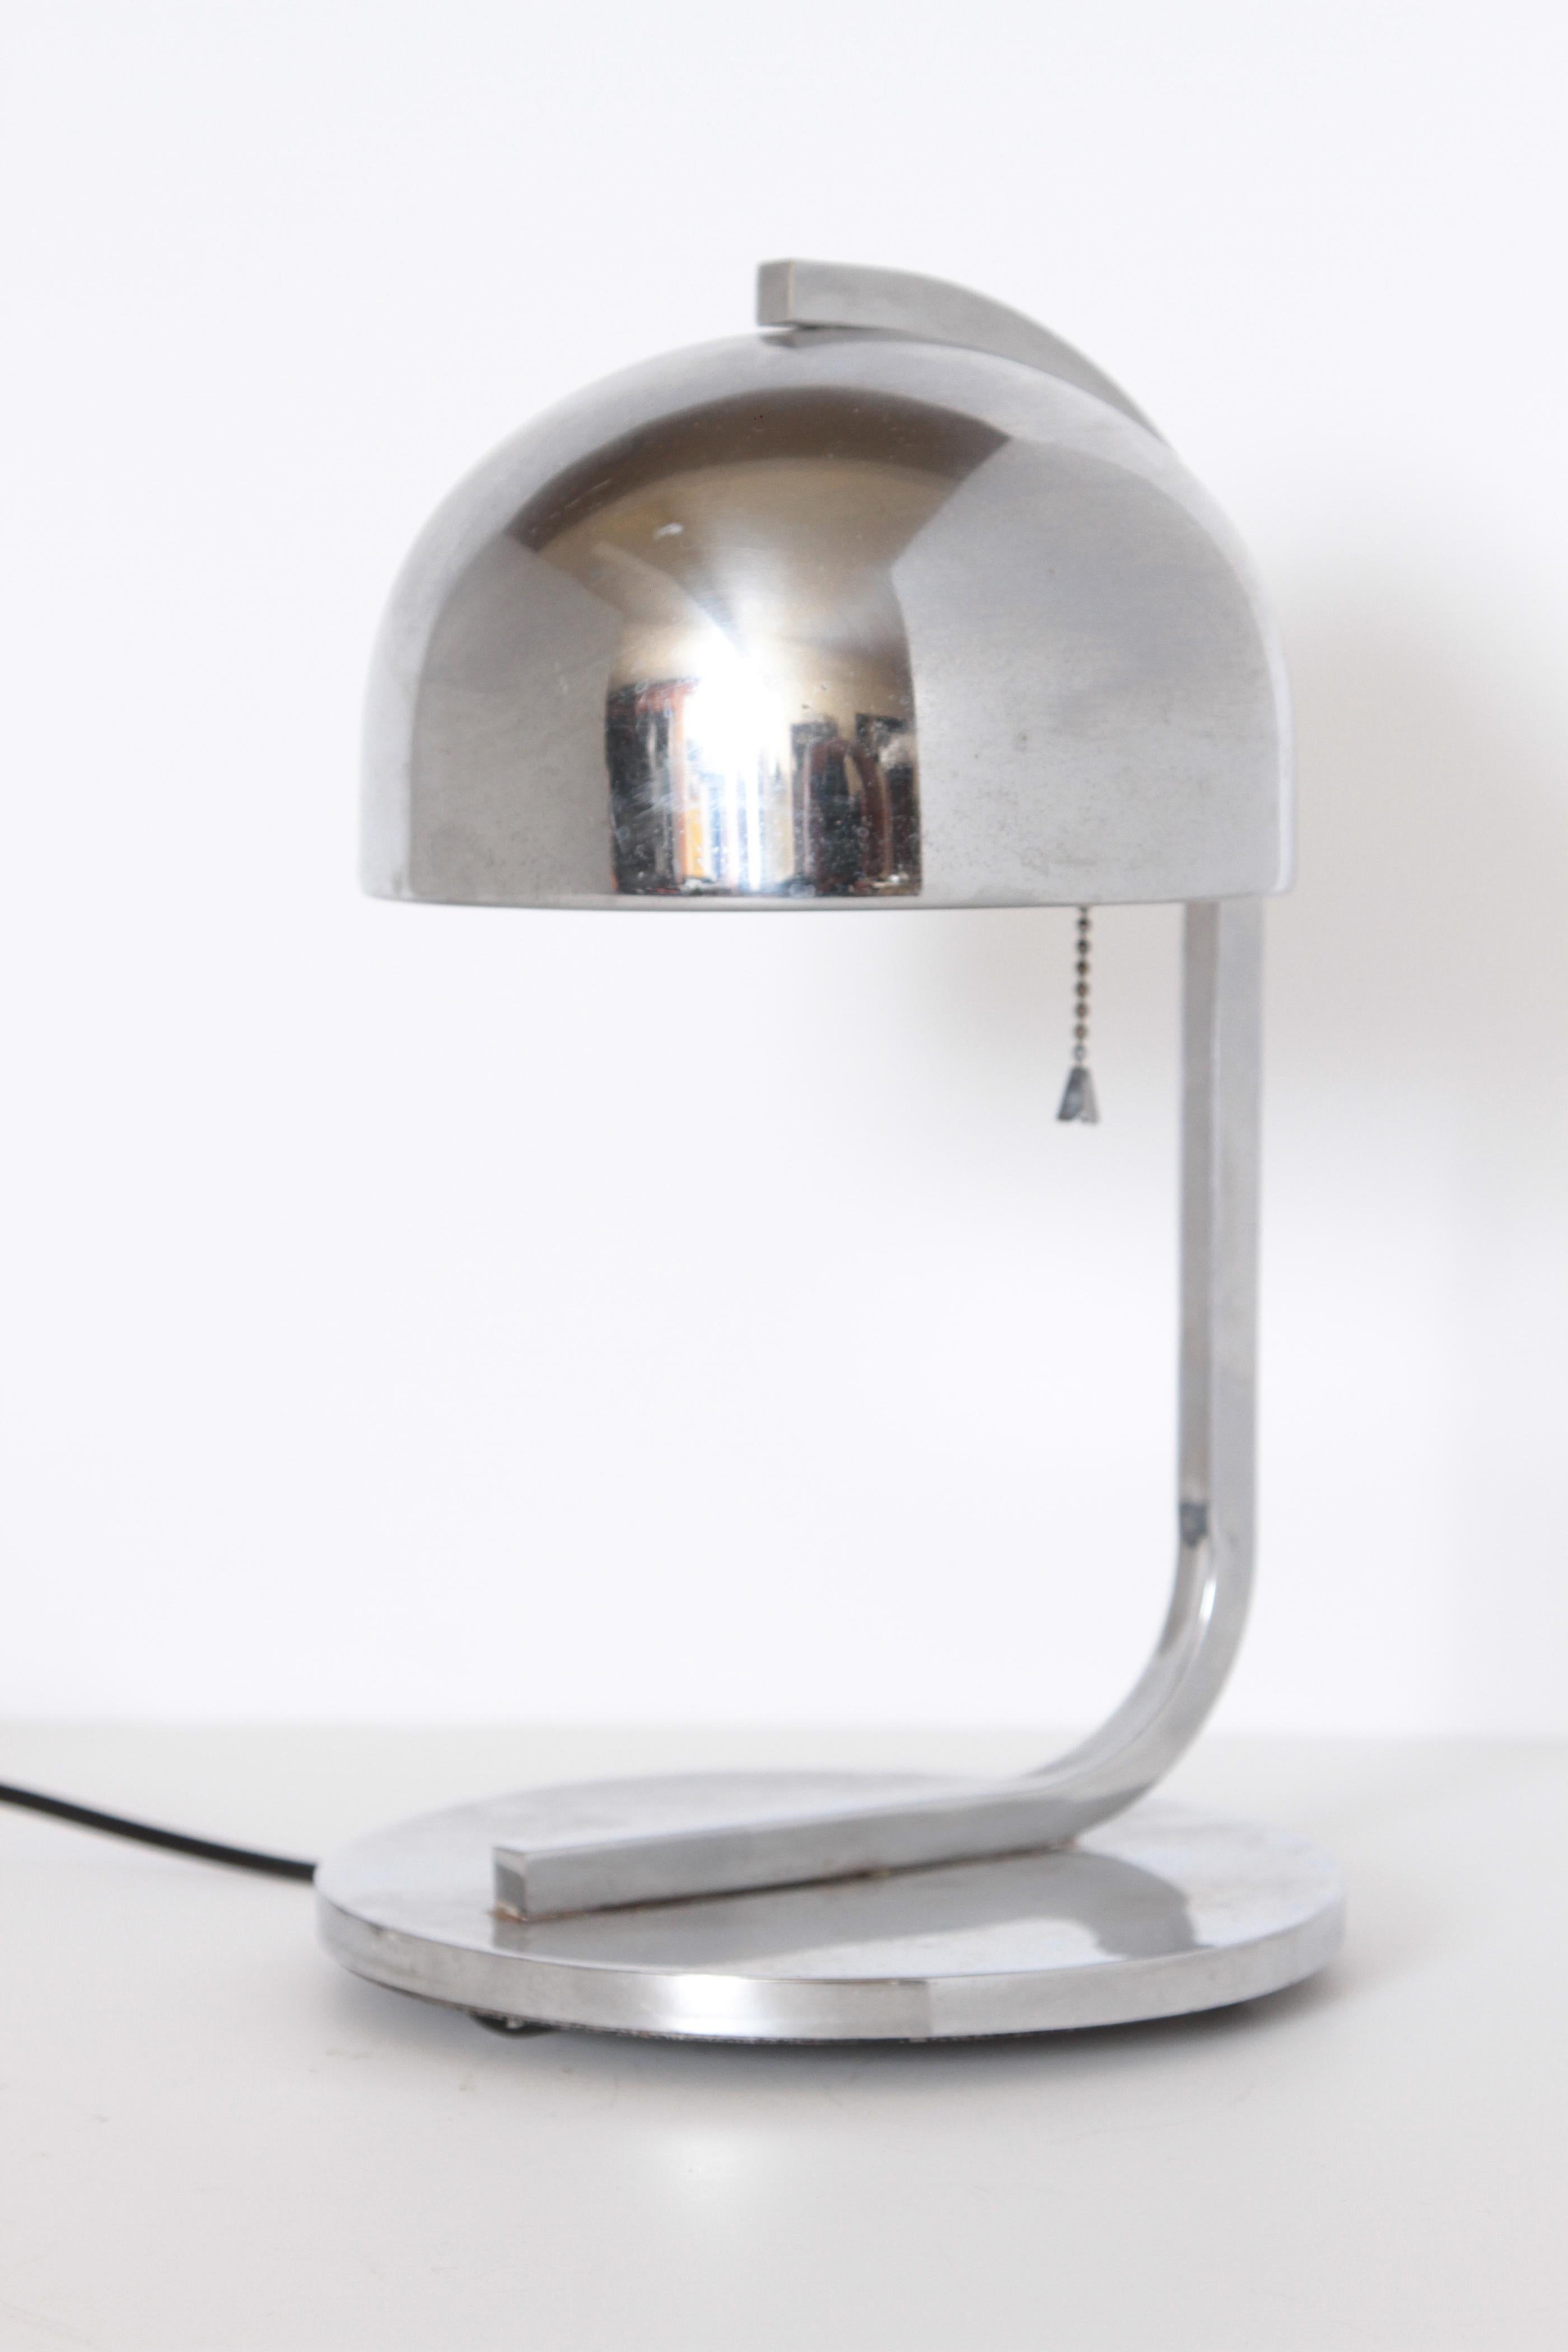 Machine Age Art Deco Streamline chrome table lamp in the manner of Donald Deskey

Square-tube arm with bell-shaped shade, a la Deskey / Nessen, with under-weighted circular base.
A well-constructed Industrial design example.
Normal wear from